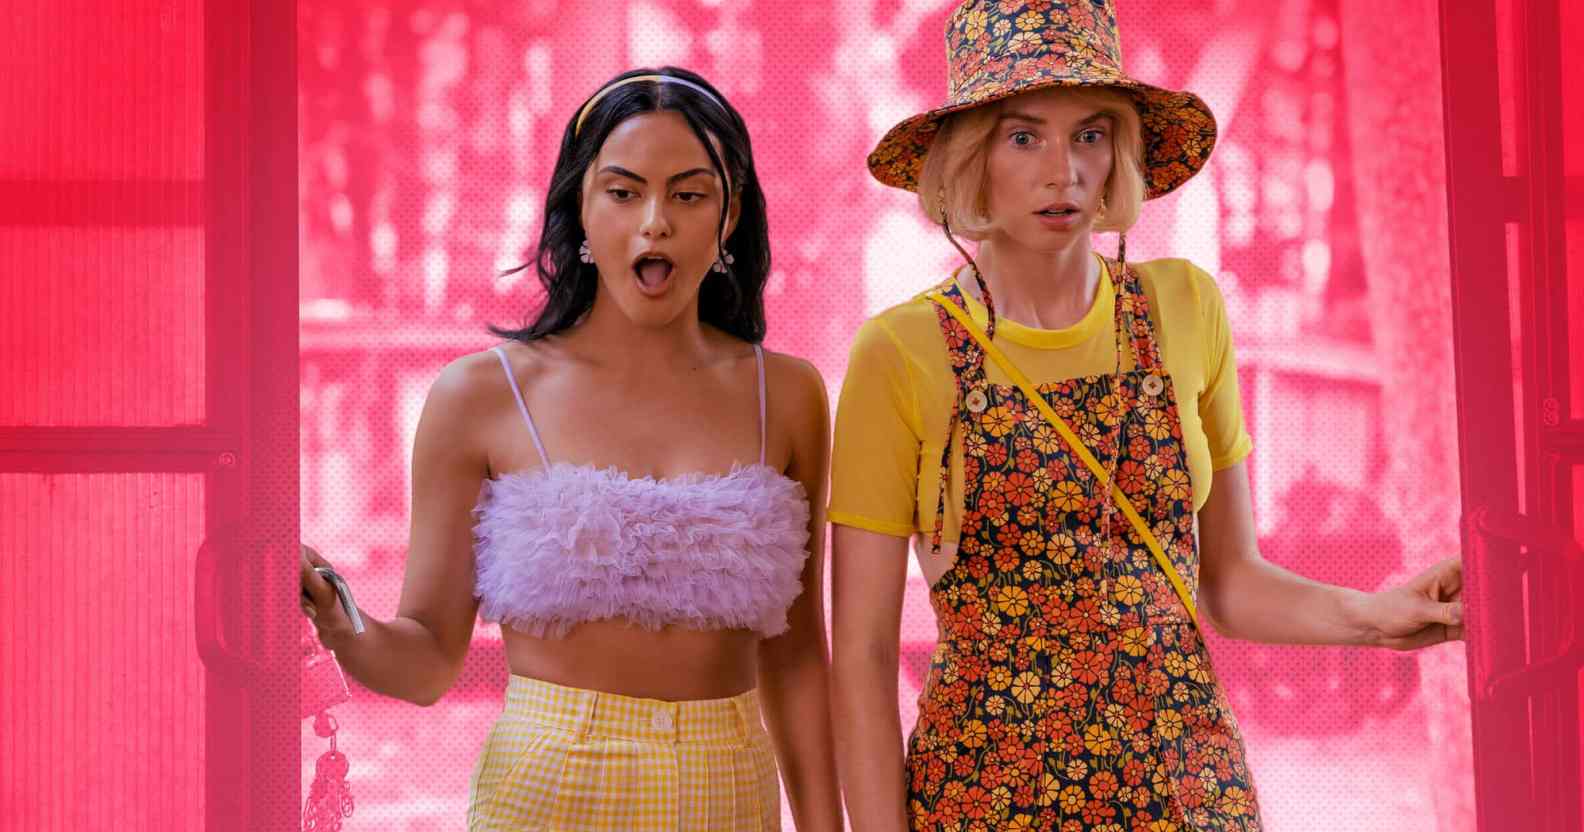 Maya Hawkes and Camila Mendes in Do Revenge.